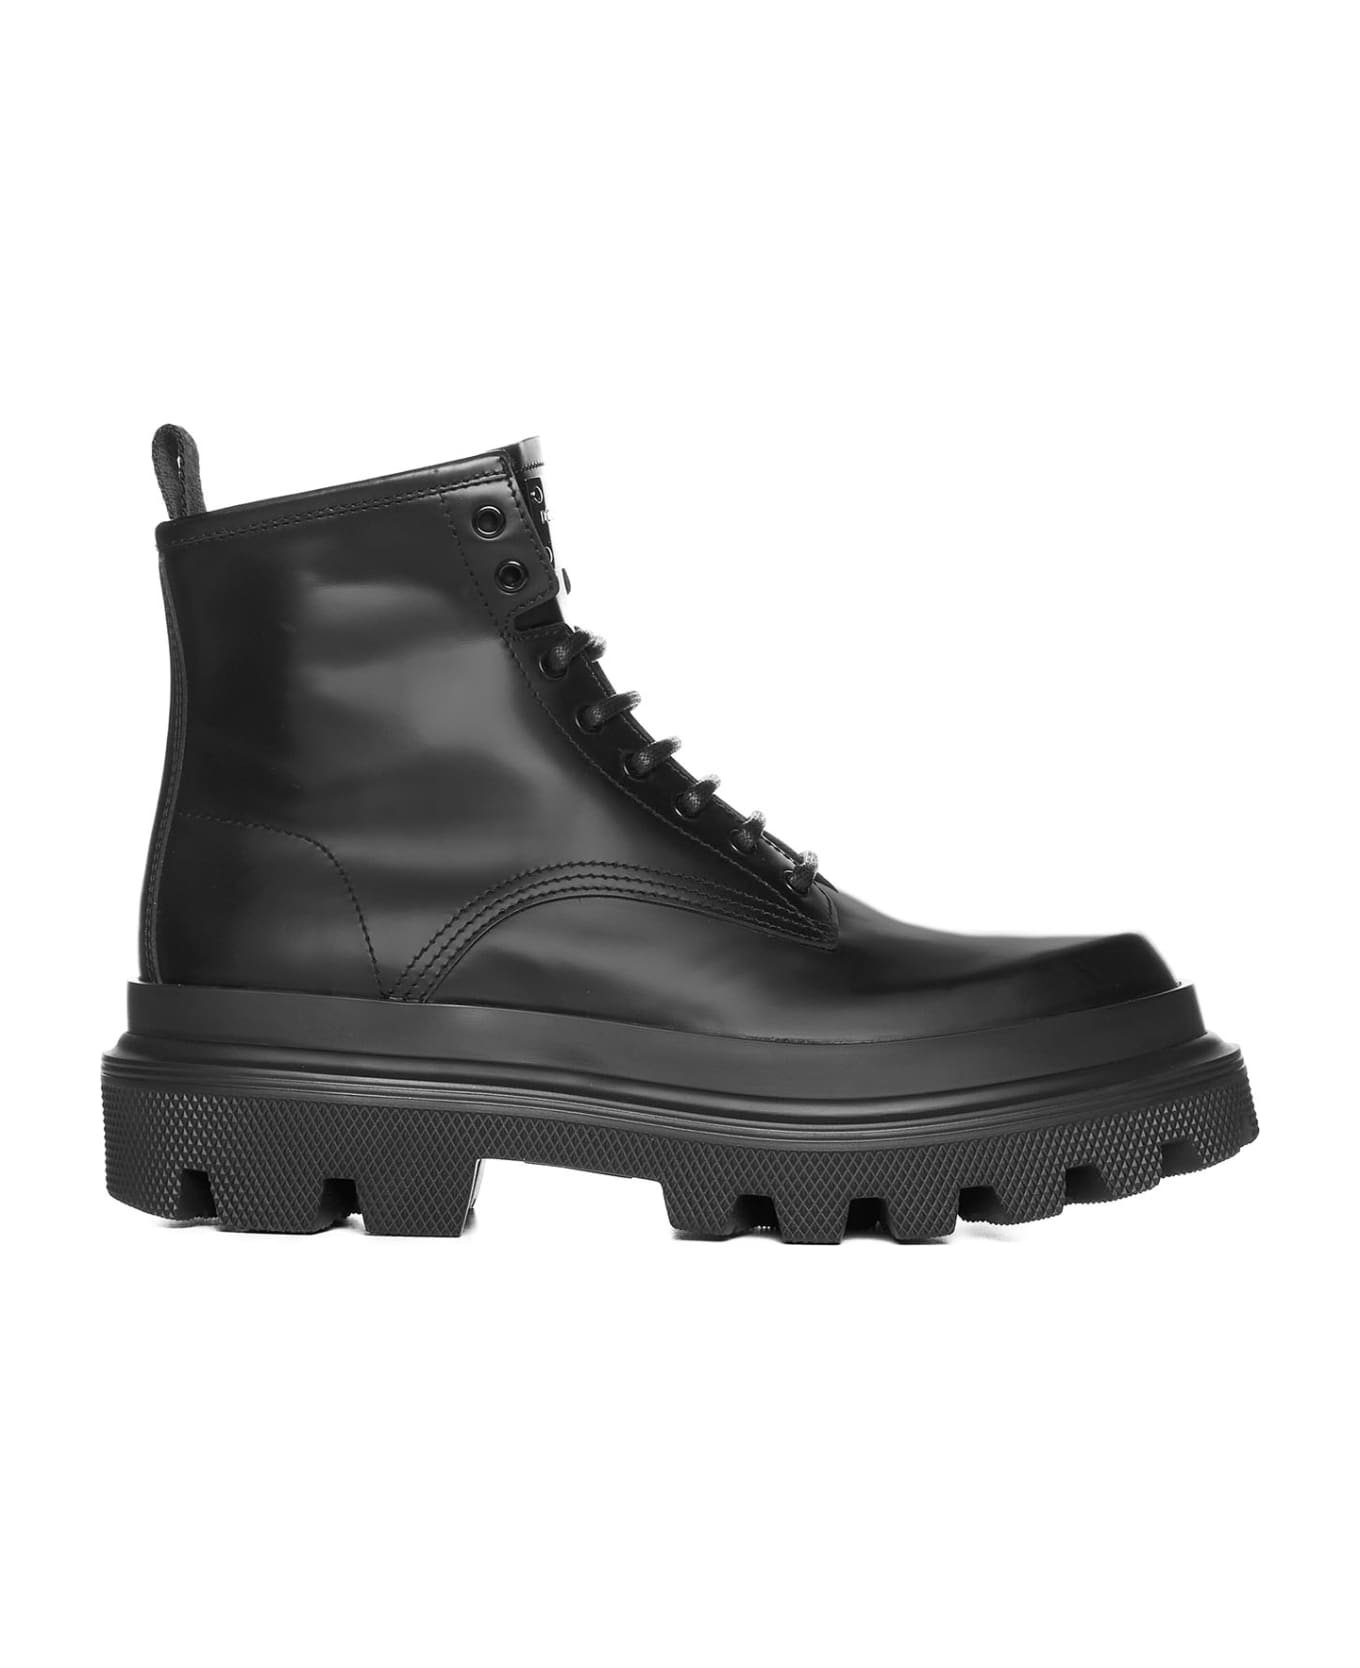 Dolce & Gabbana Ankle Boot With Logo Plaque - Nero ブーツ